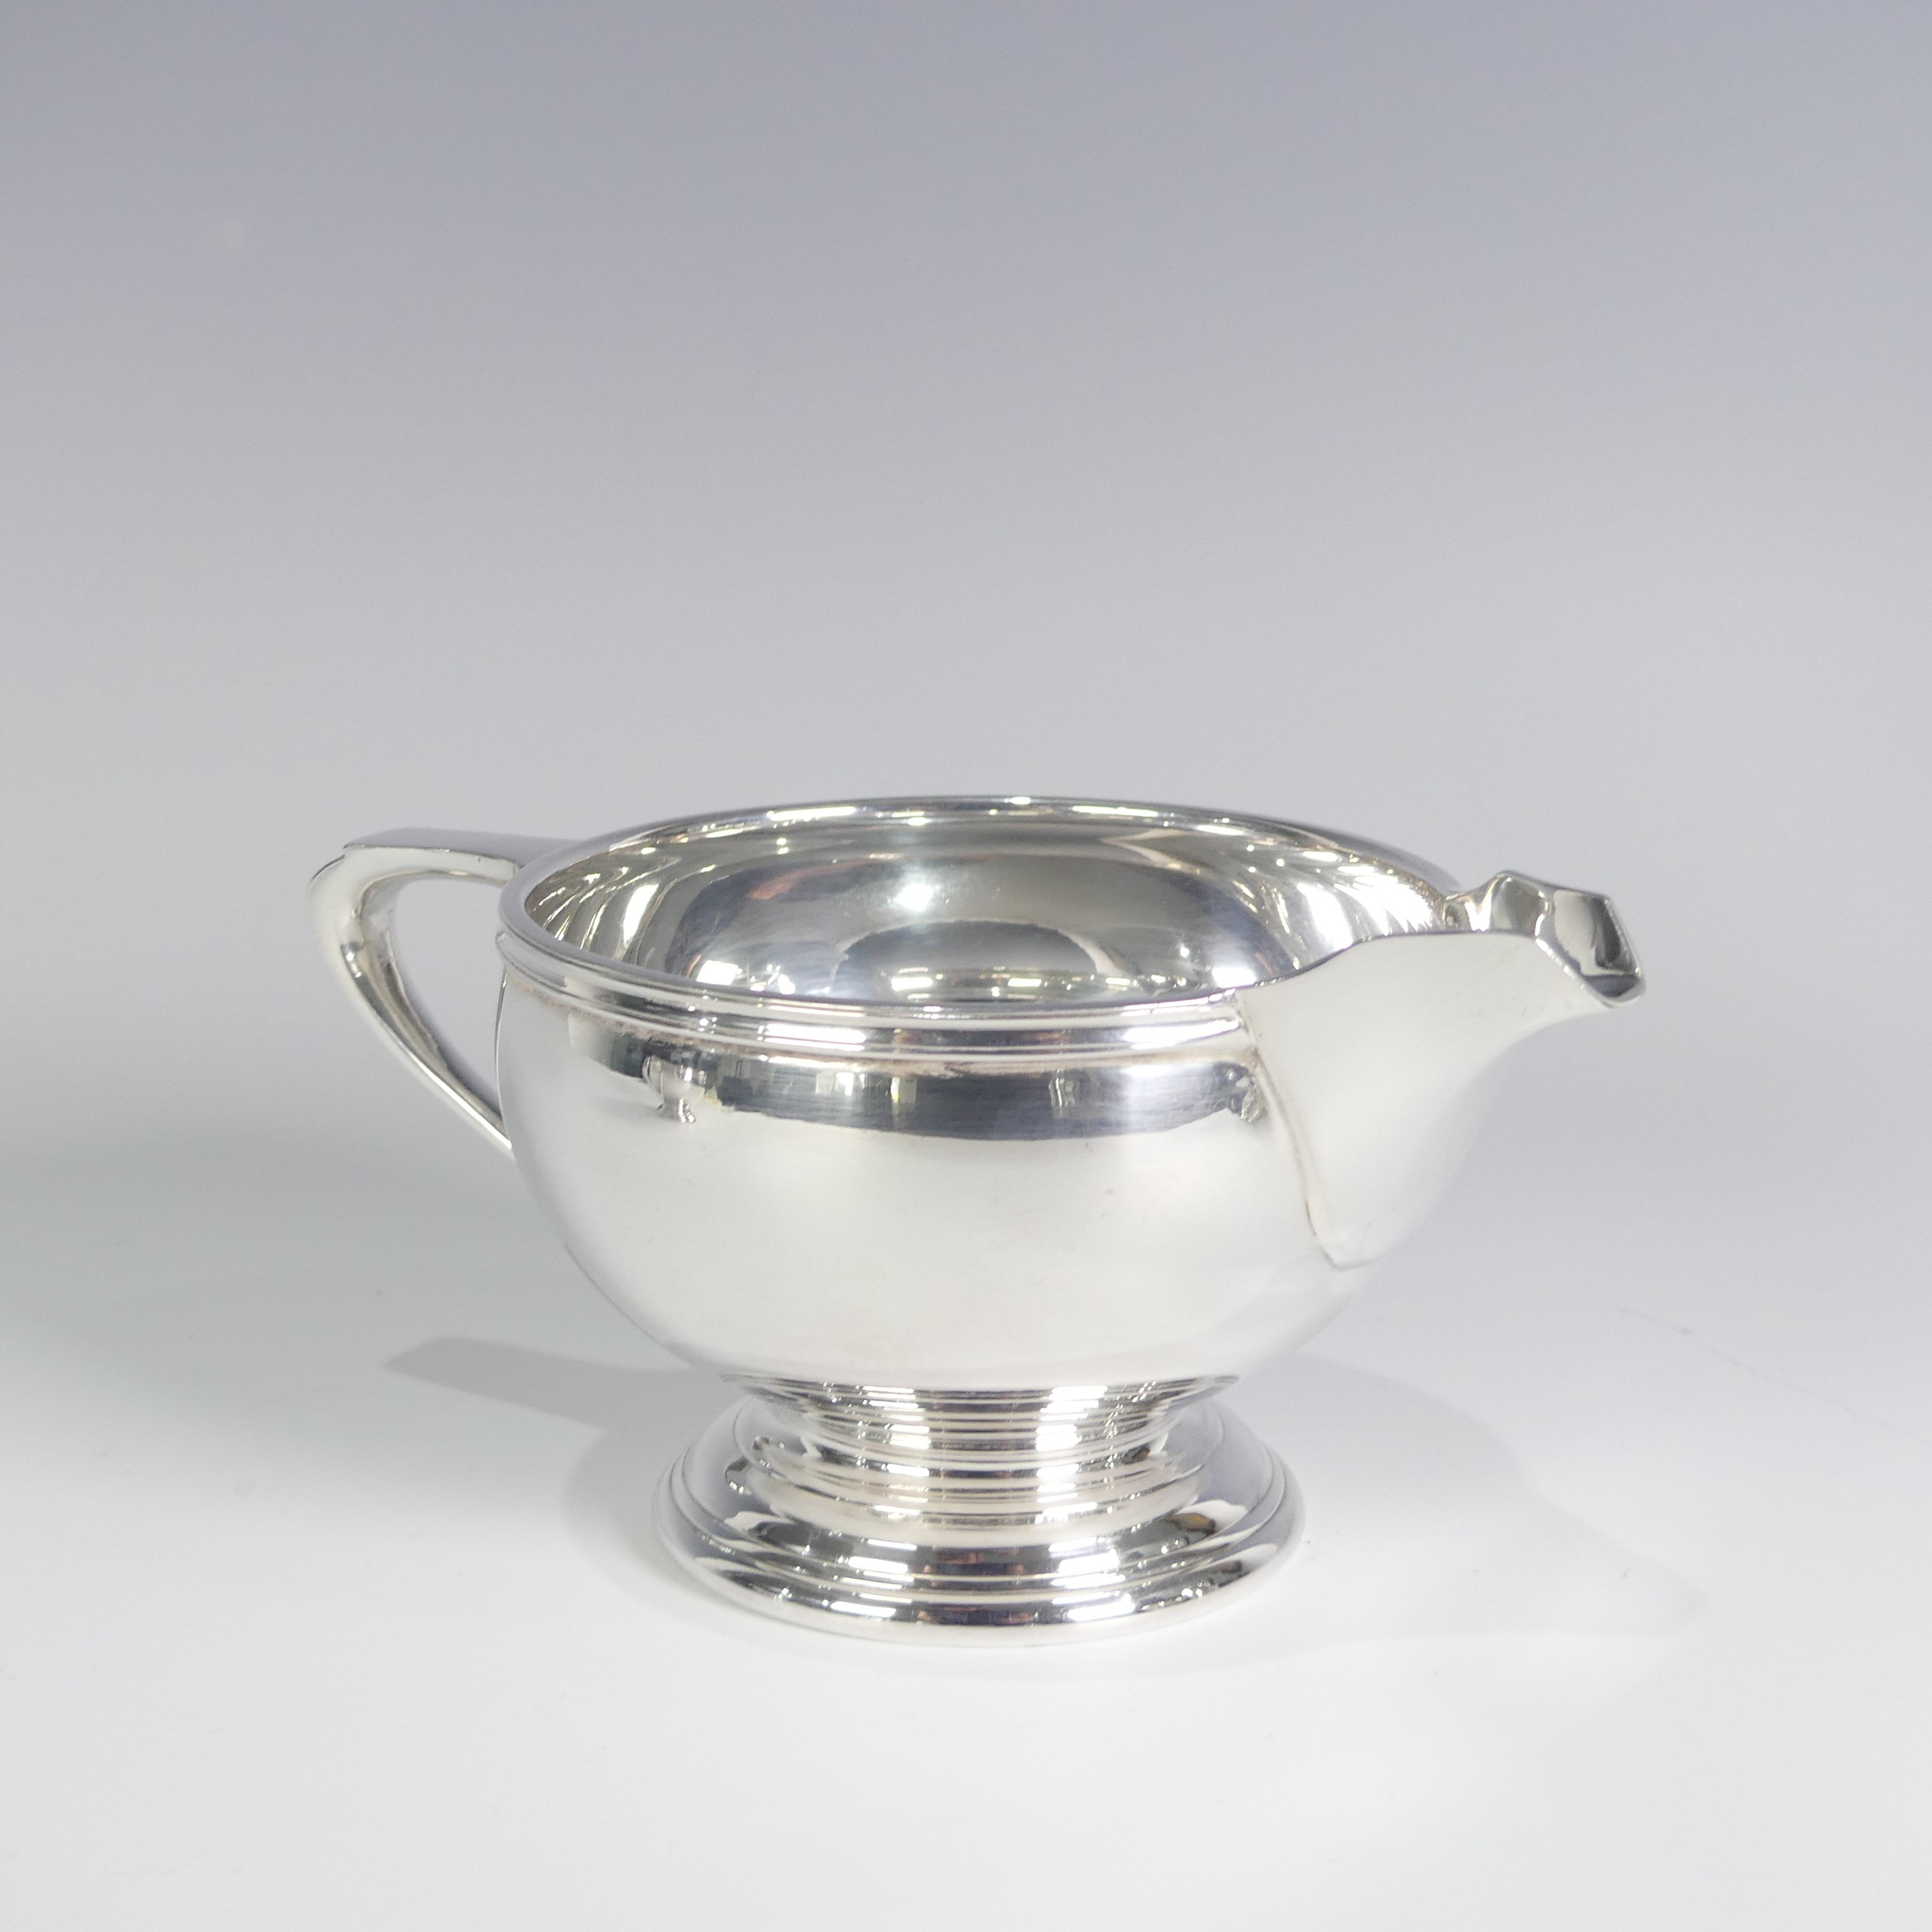 A Mappin & Webb 'Mappin Plate' four piece Tea Set, pattern no. W23101 (4) - Image 7 of 8